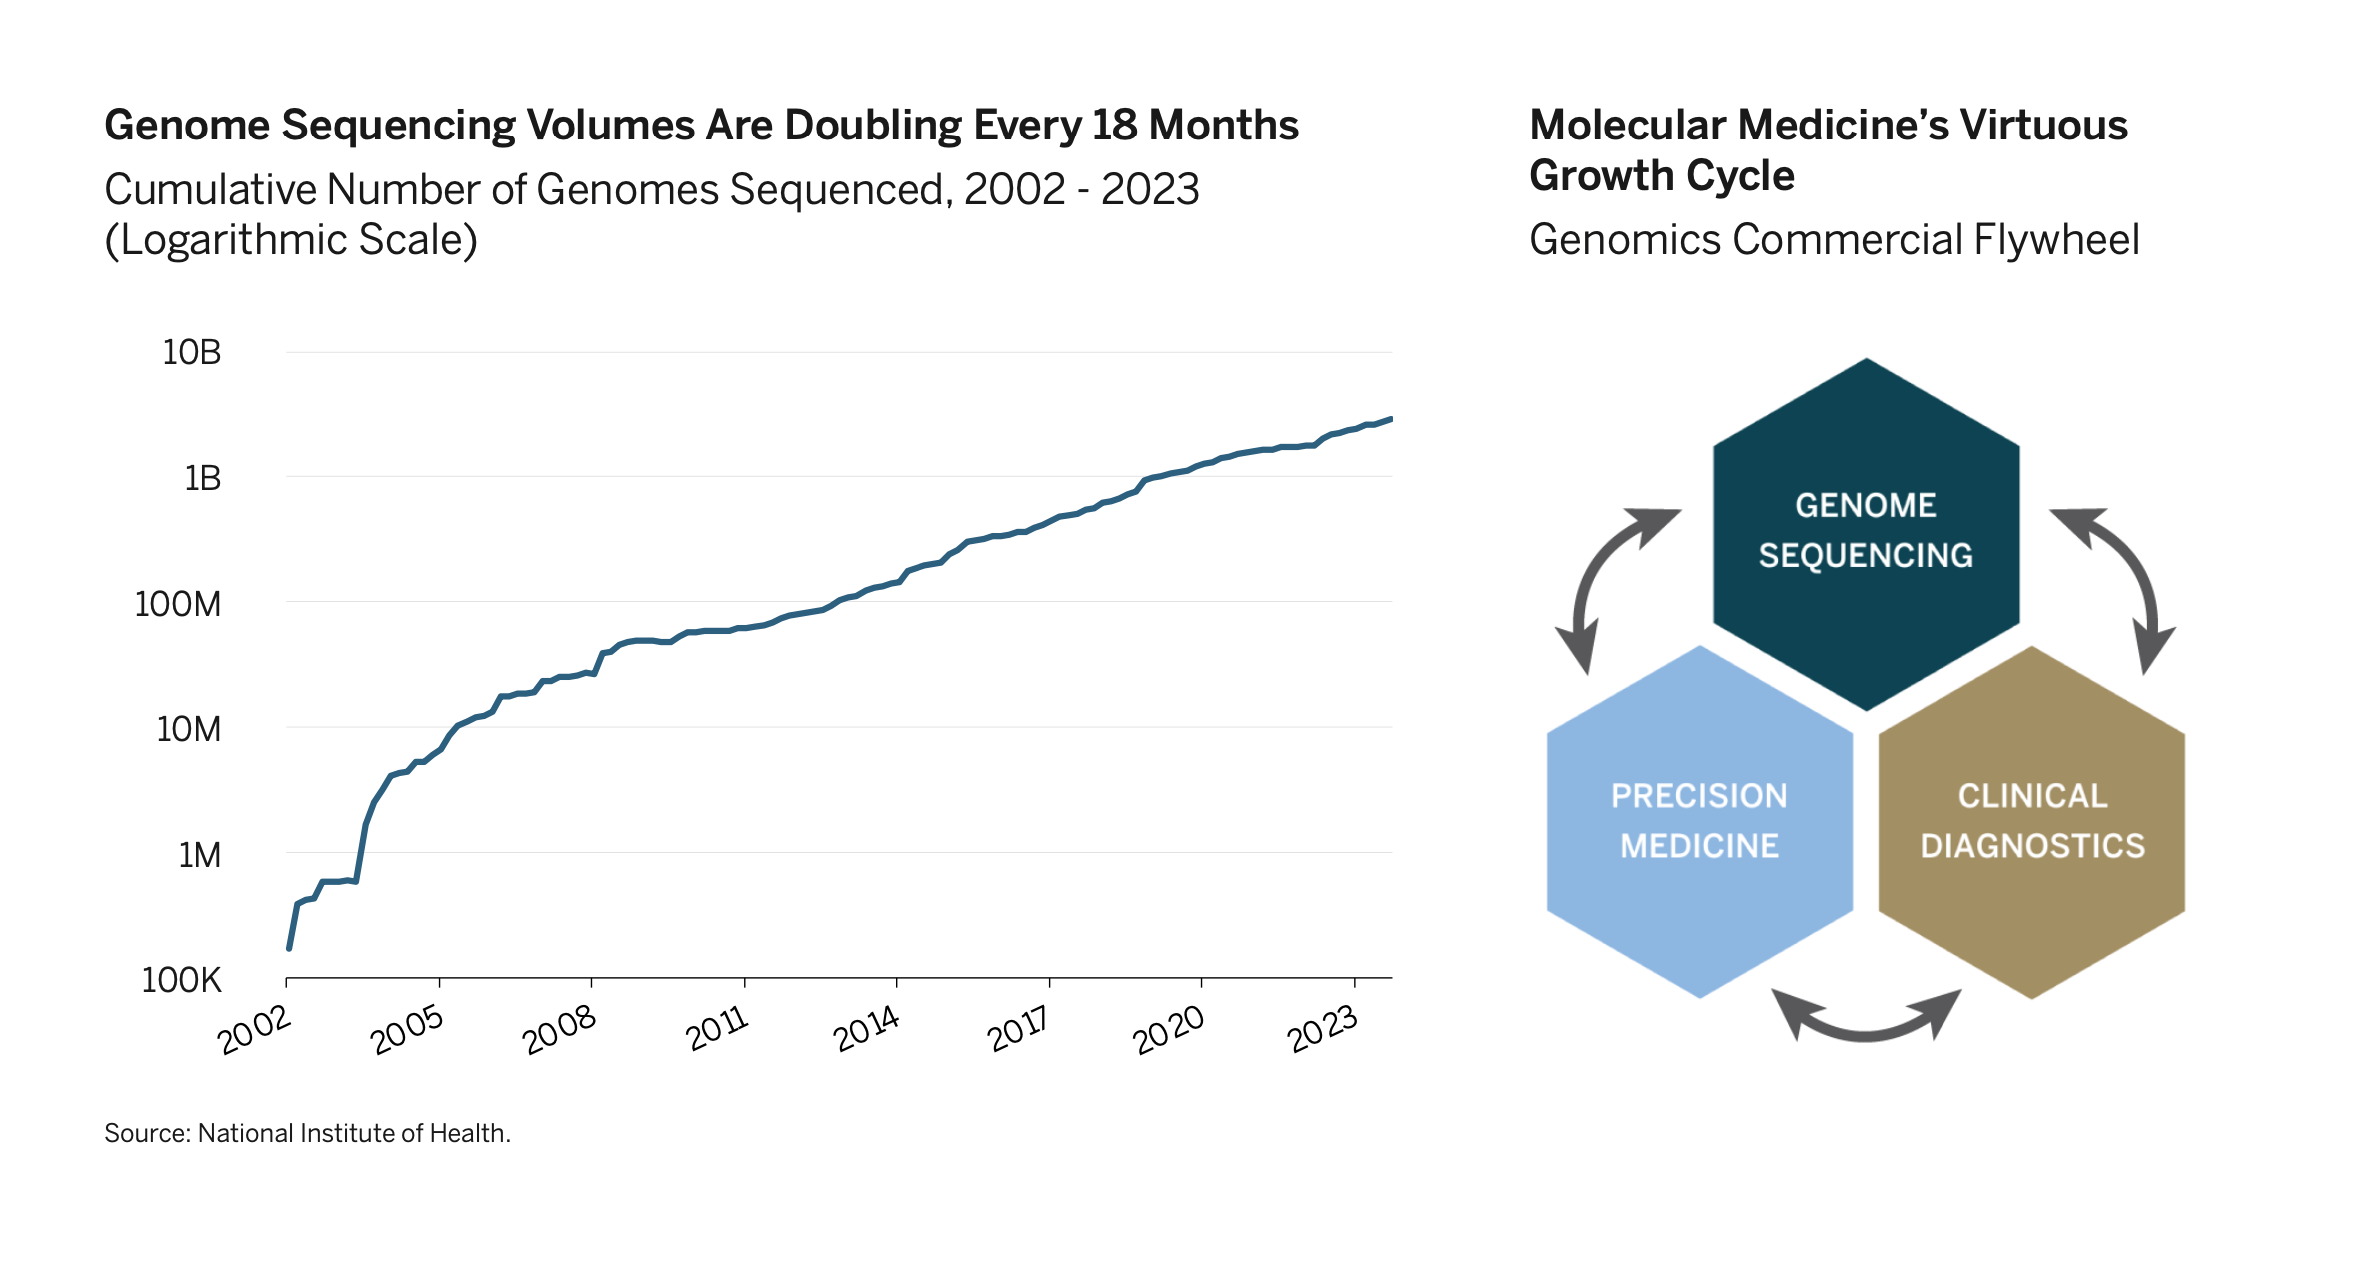 Genome Sequencing Volumes Are Doubling Every 18 Months Exhibit